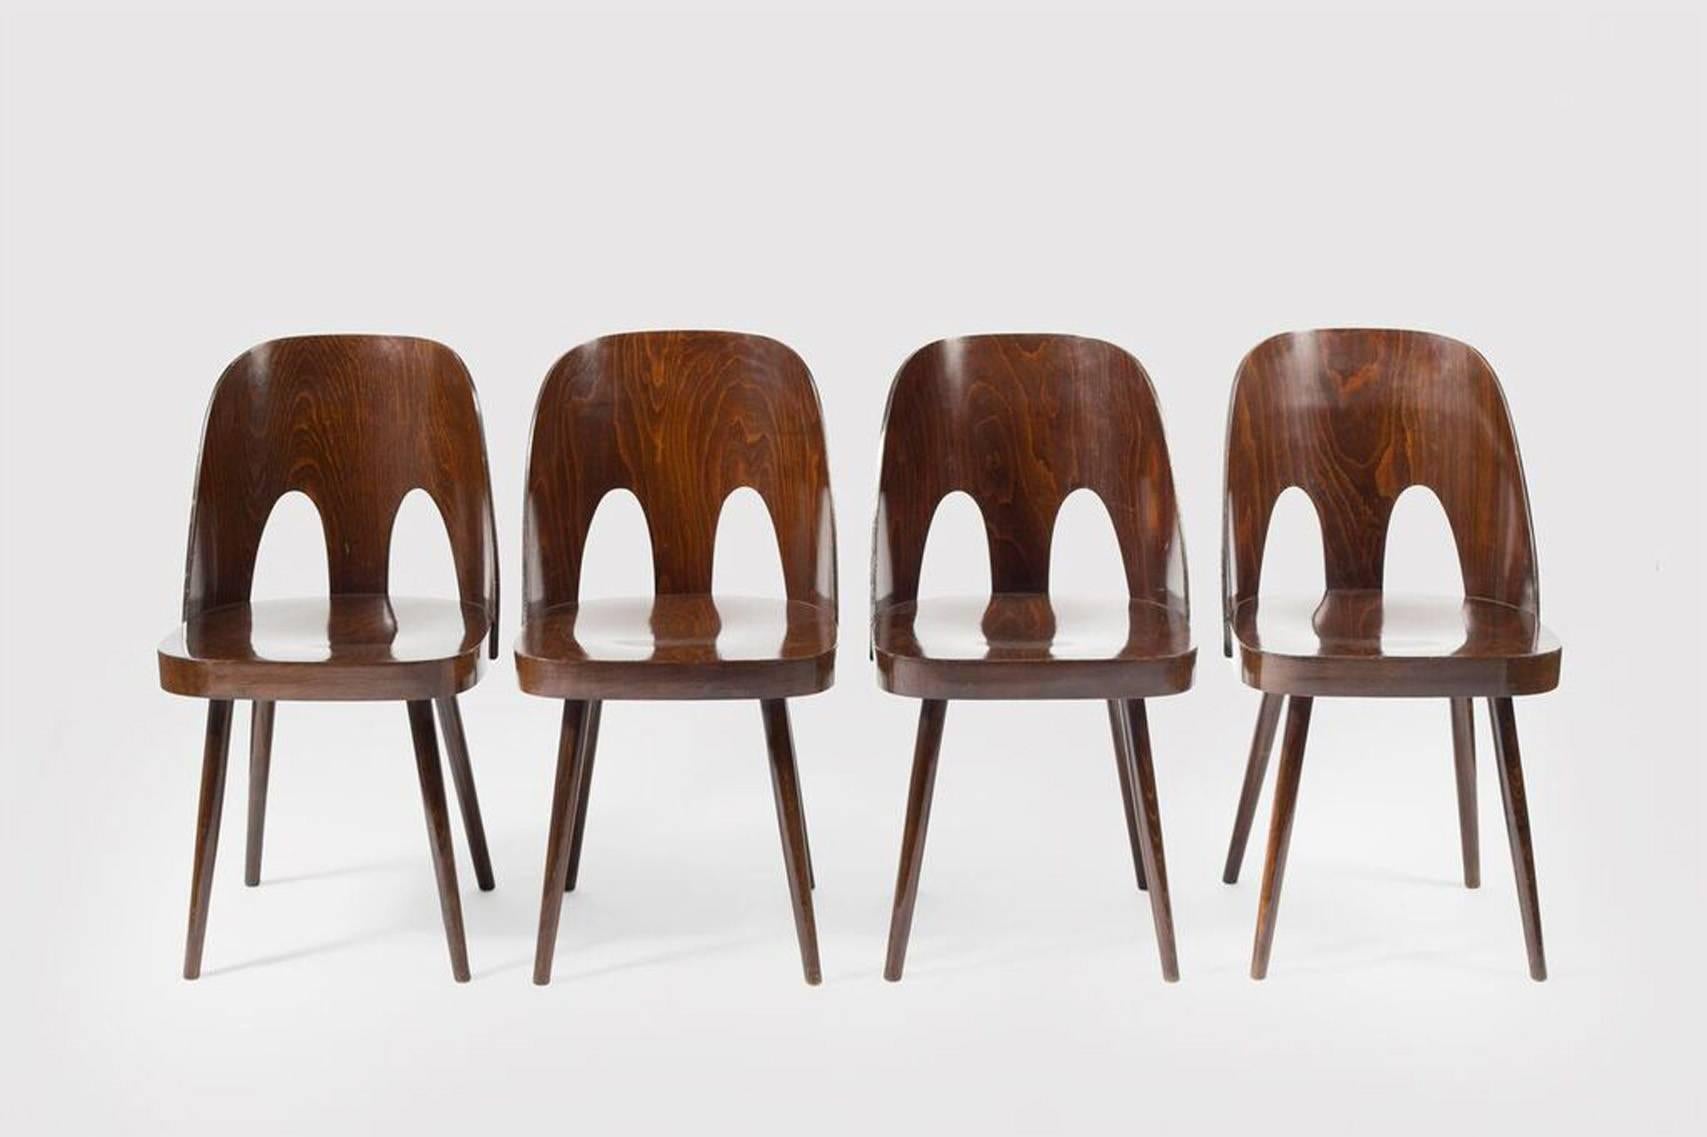 Four dining chairs by Oswald Haerdtl designed for Thonet. Chairs are made out of beech wood, stained and lacquered in high gloss finish. Bent wood swooping backs have two openings.